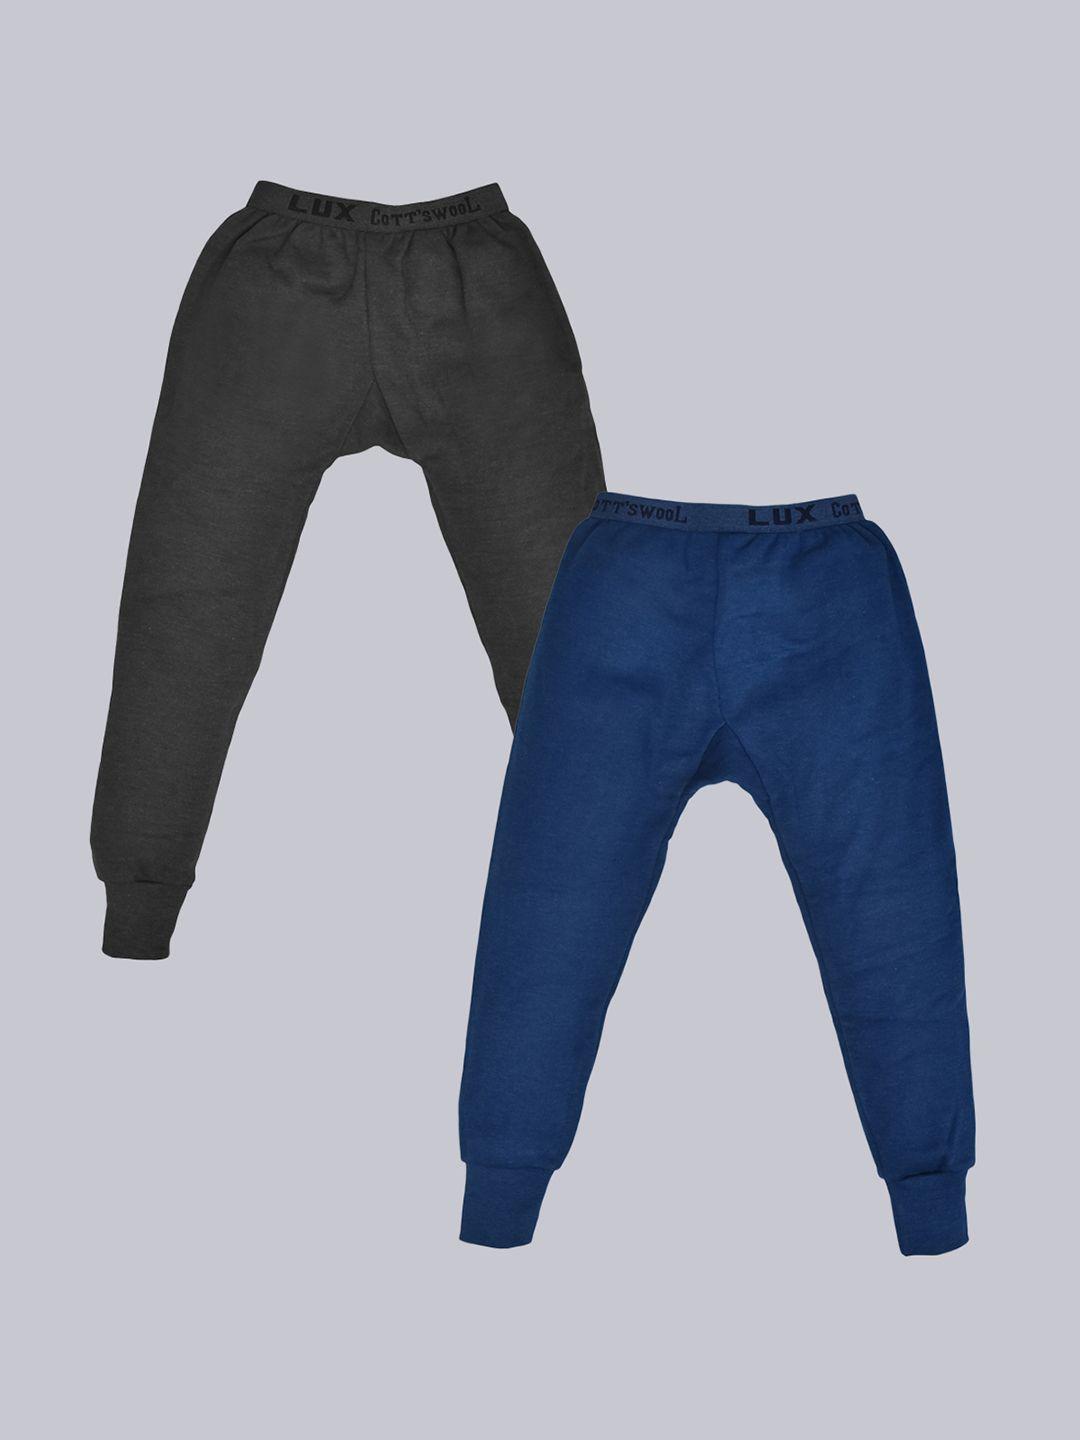 lux cottswool boys pack of 2 black and blue solid cotton thermal bottoms